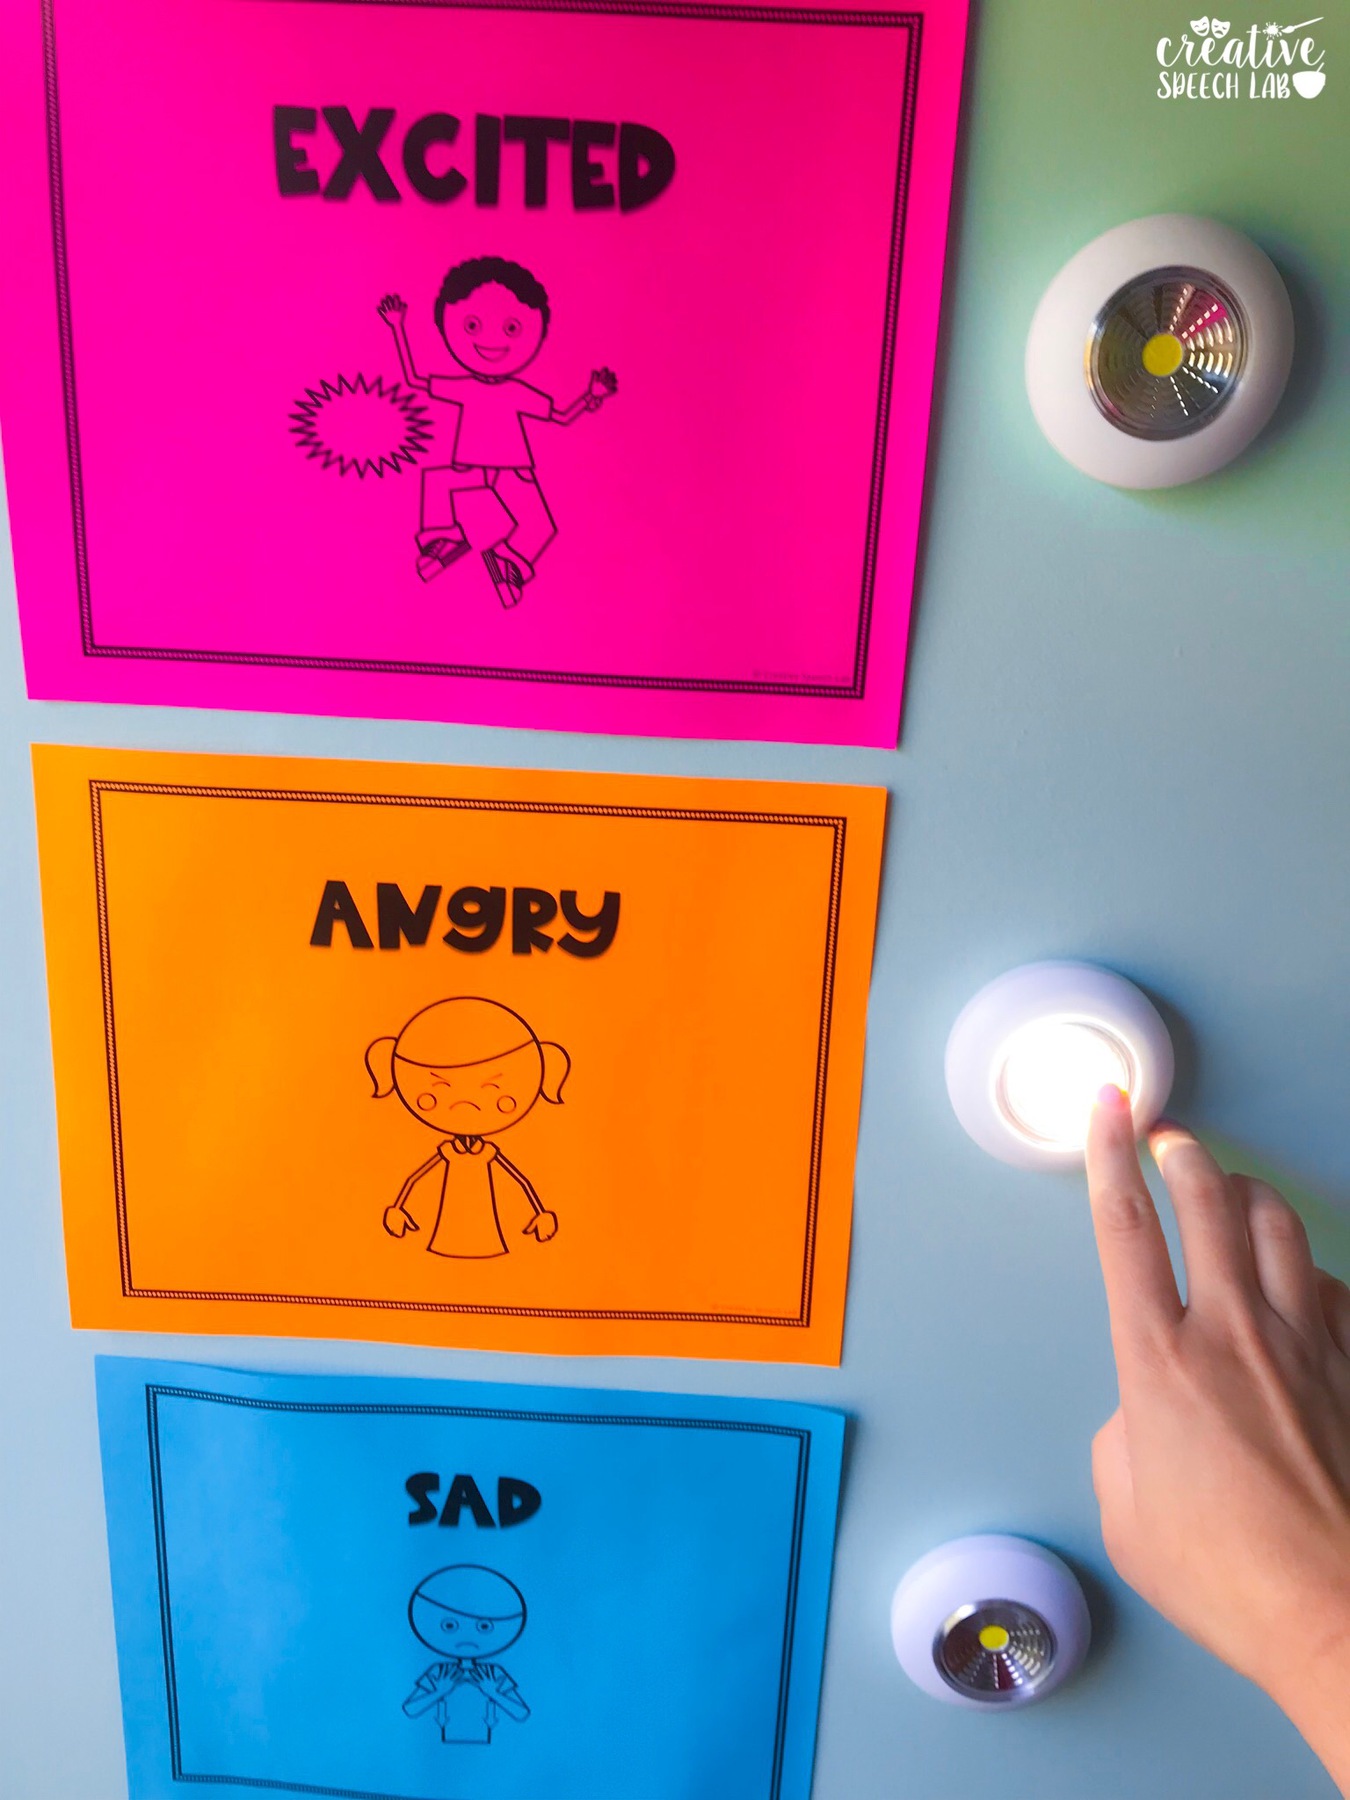 Displaying emotion vocabulary with tap lights.